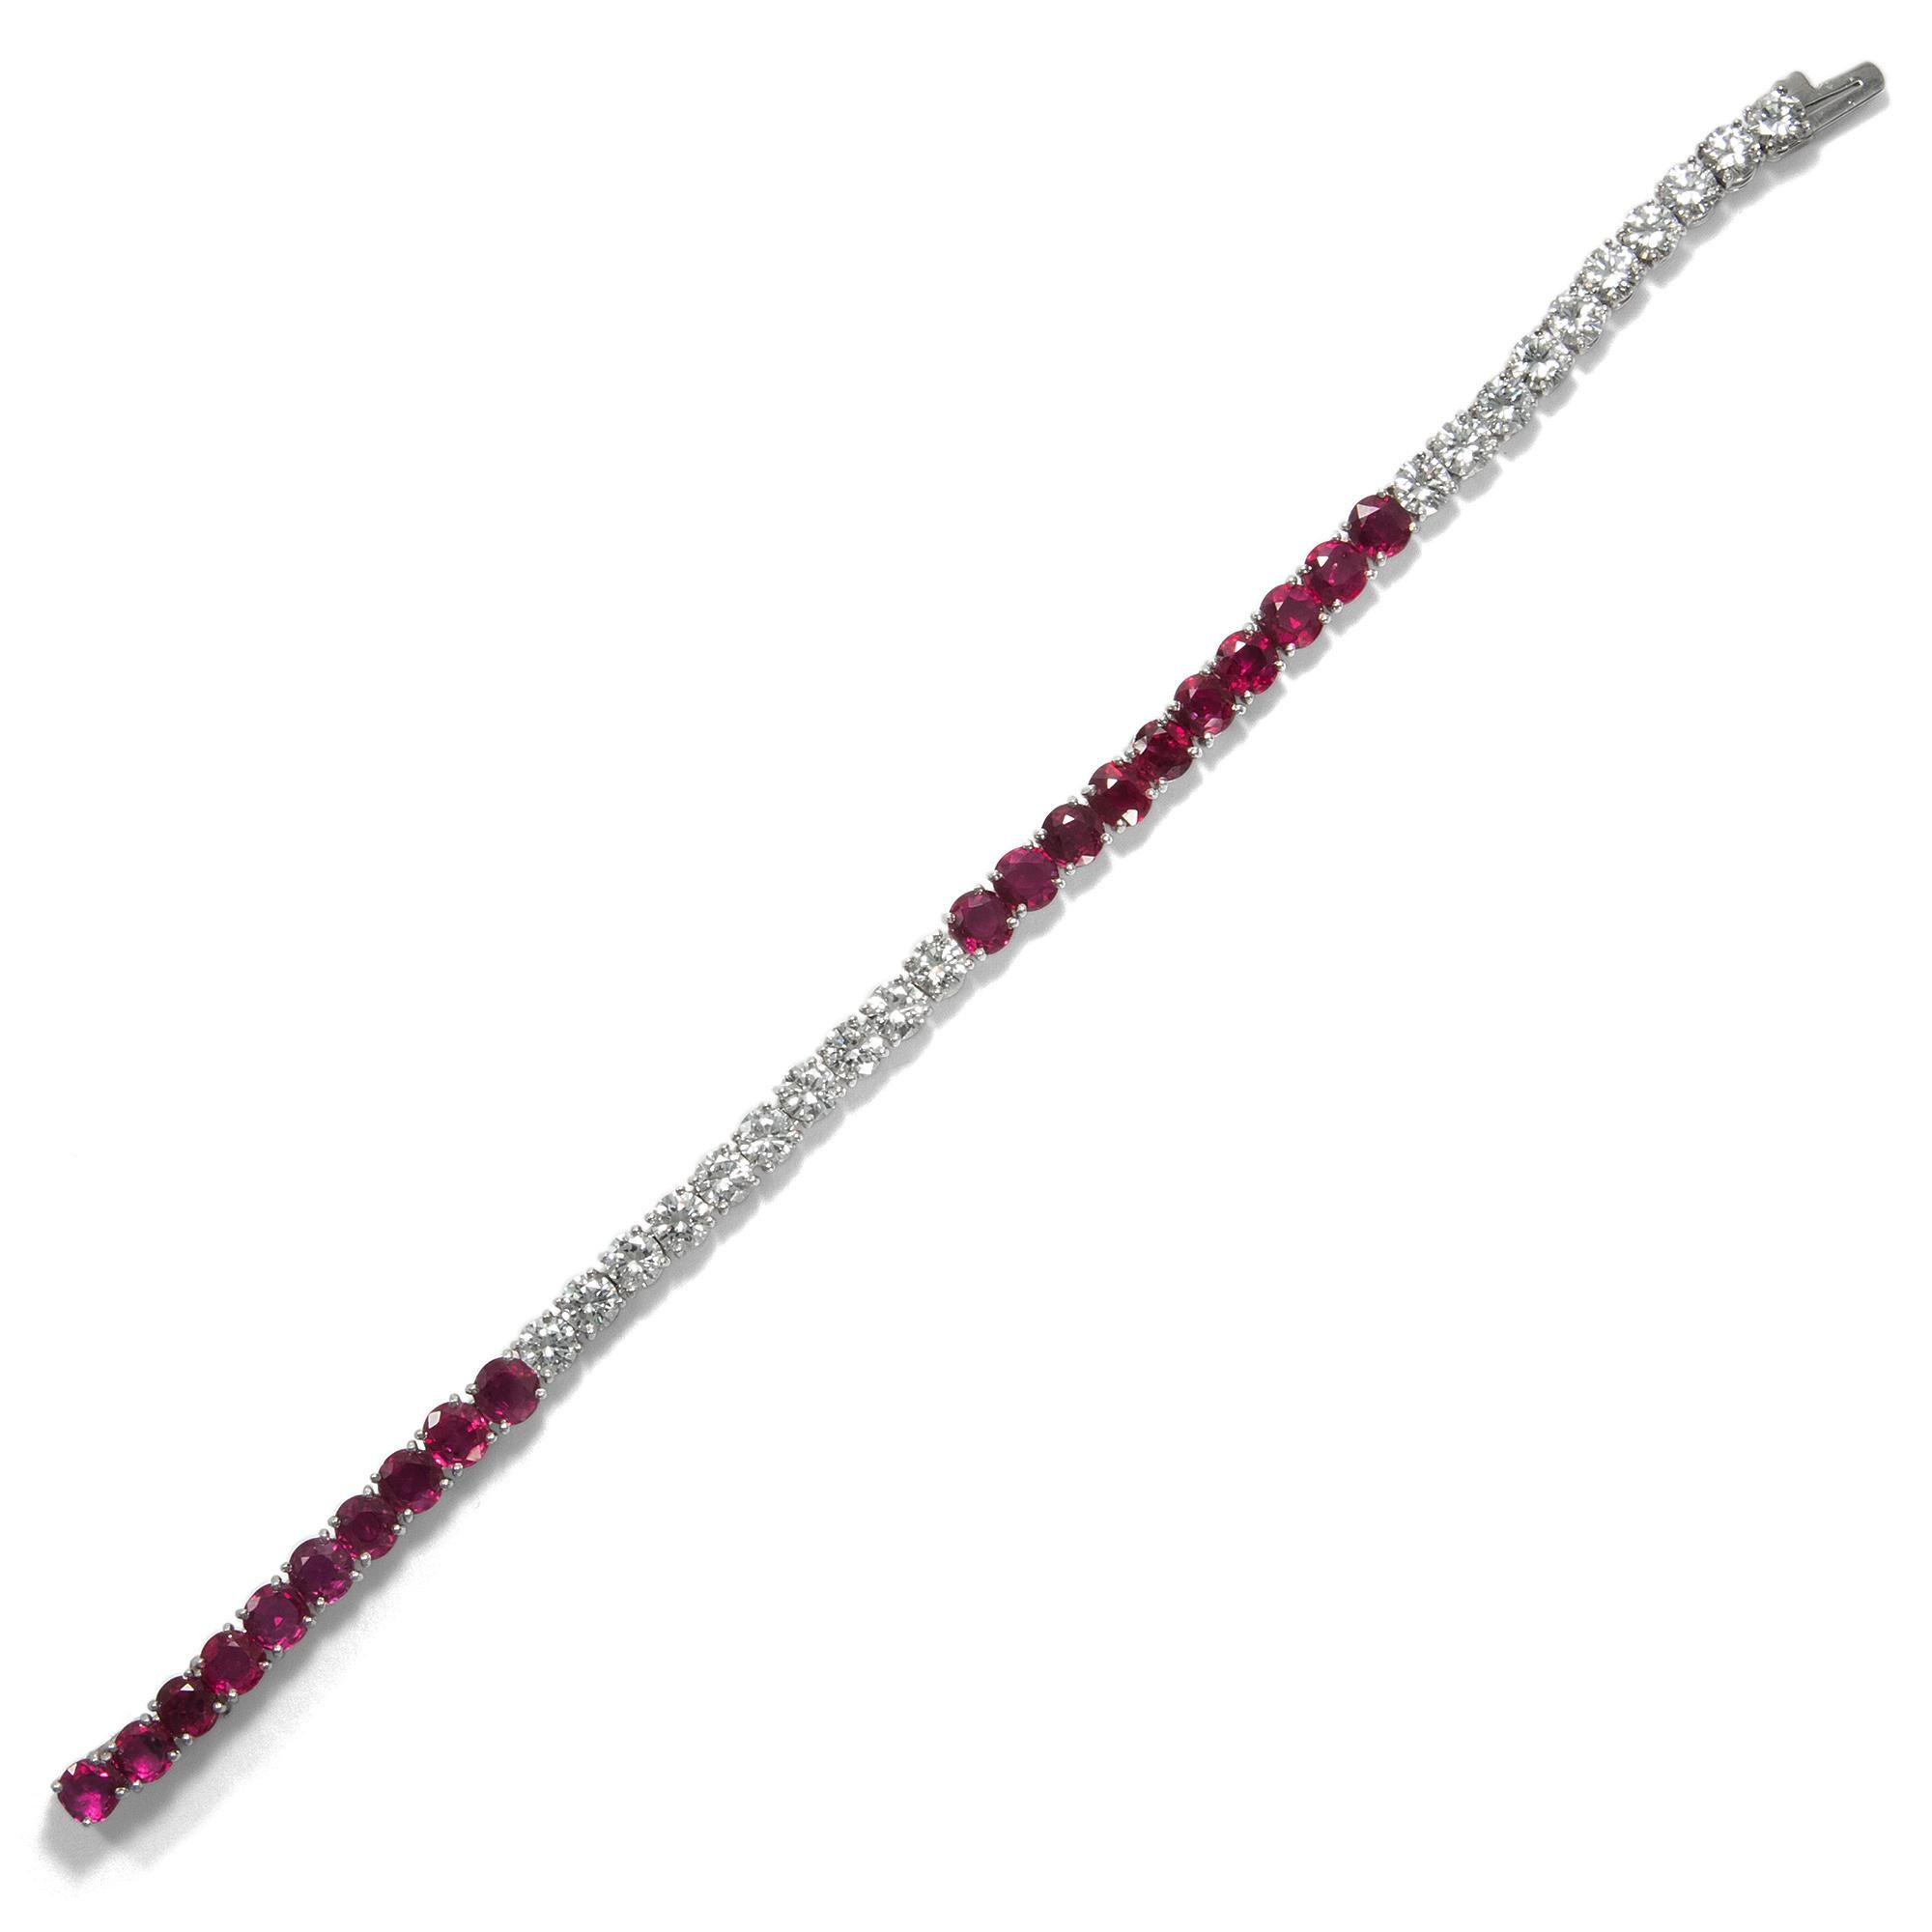 Modern Vintage 1960s 5.89 ct Diamond and 9.50 ct Untreated Ruby Rivière Tennis Bracelet For Sale